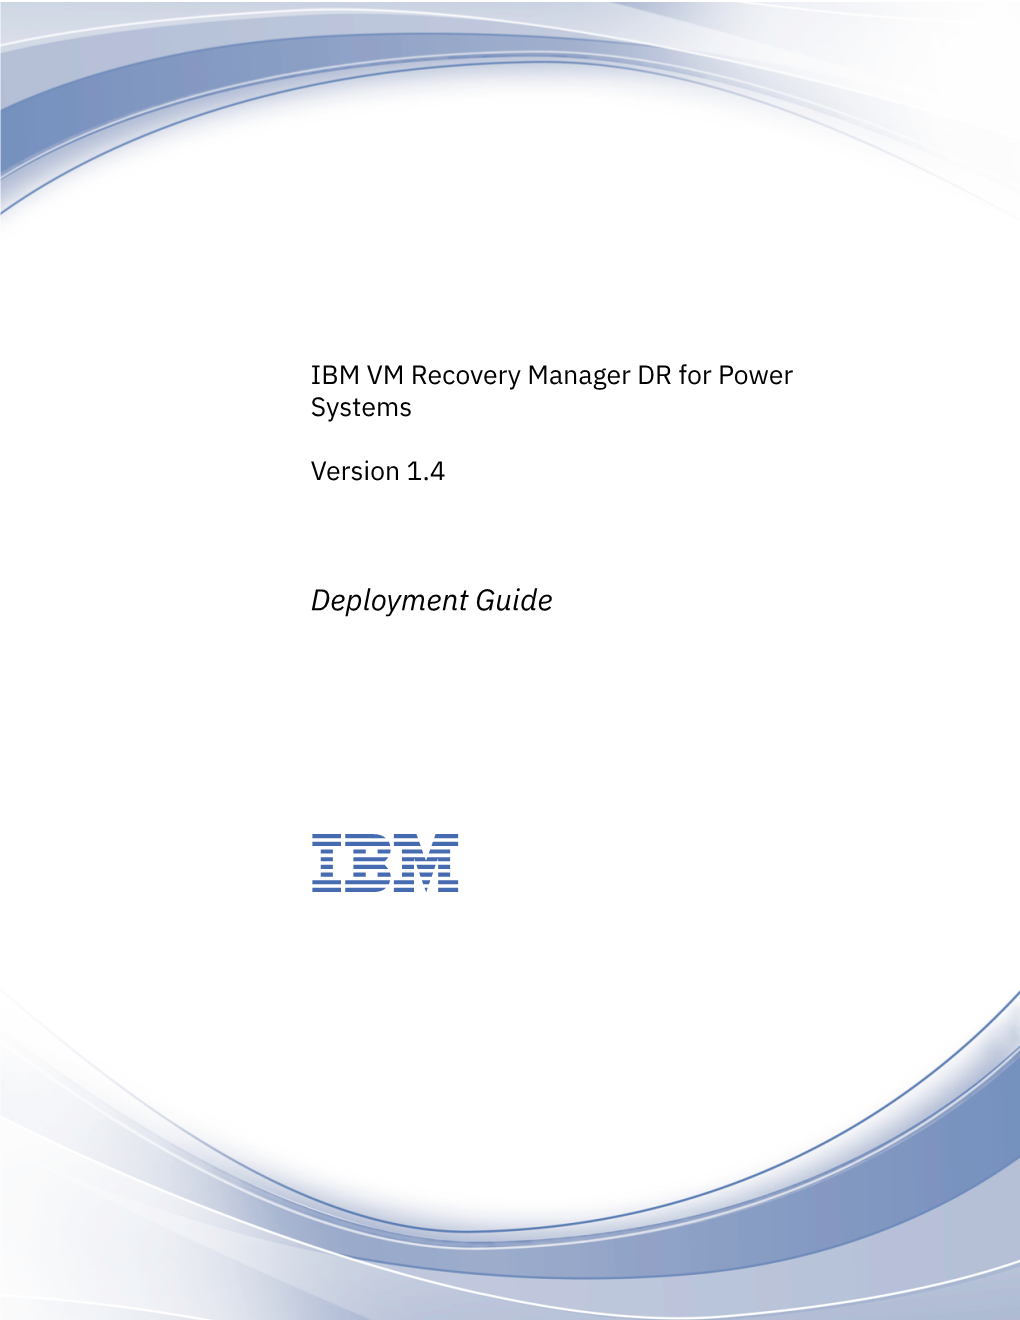 IBM VM Recovery Manager DR for Power Systems Version 1.4: Deployment Guide Overview for IBM VM Recovery Manager DR for Power Systems